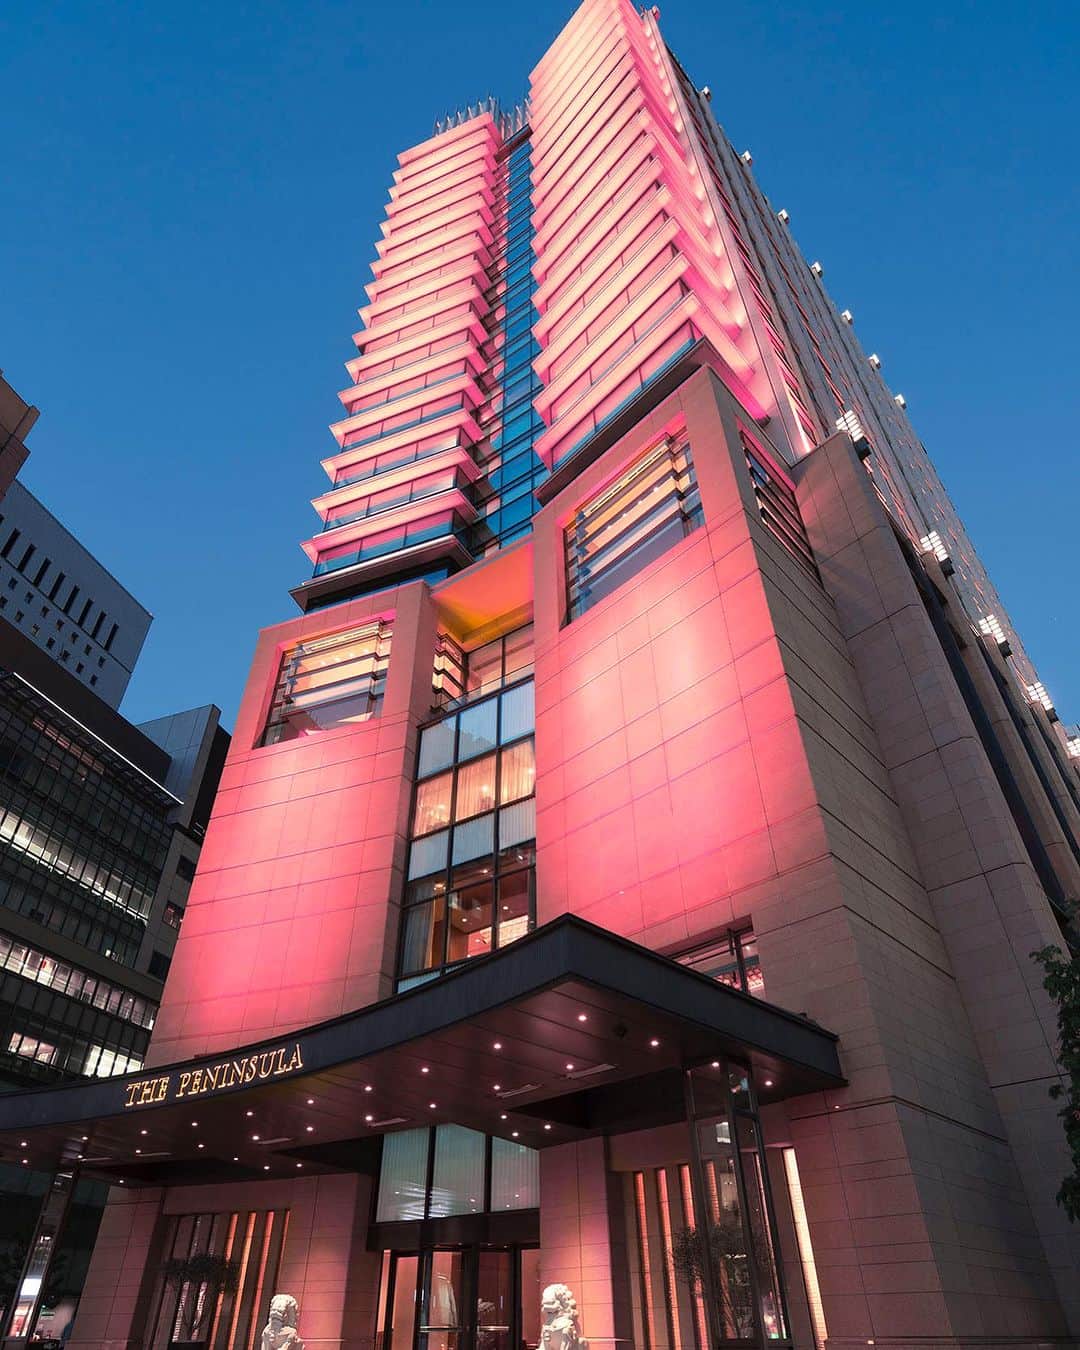 The Peninsula Tokyo/ザ・ペニンシュラ東京のインスタグラム：「10月はピンクリボン月間ですね🎀今年も乳がんの予防や早期発見など早期治療の大切さを伝える “ザ・ペニンシュラ・イン・ピンク”を実施。1階「ザ・ロビー」では"ピンク”をテーマにしたアフタヌーンティーをご用意して皆さまのご来館をお待ちしております🎗️  This October, The Peninsula Tokyo will once again light up in pink, and our iconic afternoon tea will again turn into a pink-themed tea to support breast cancer awareness🎀.」